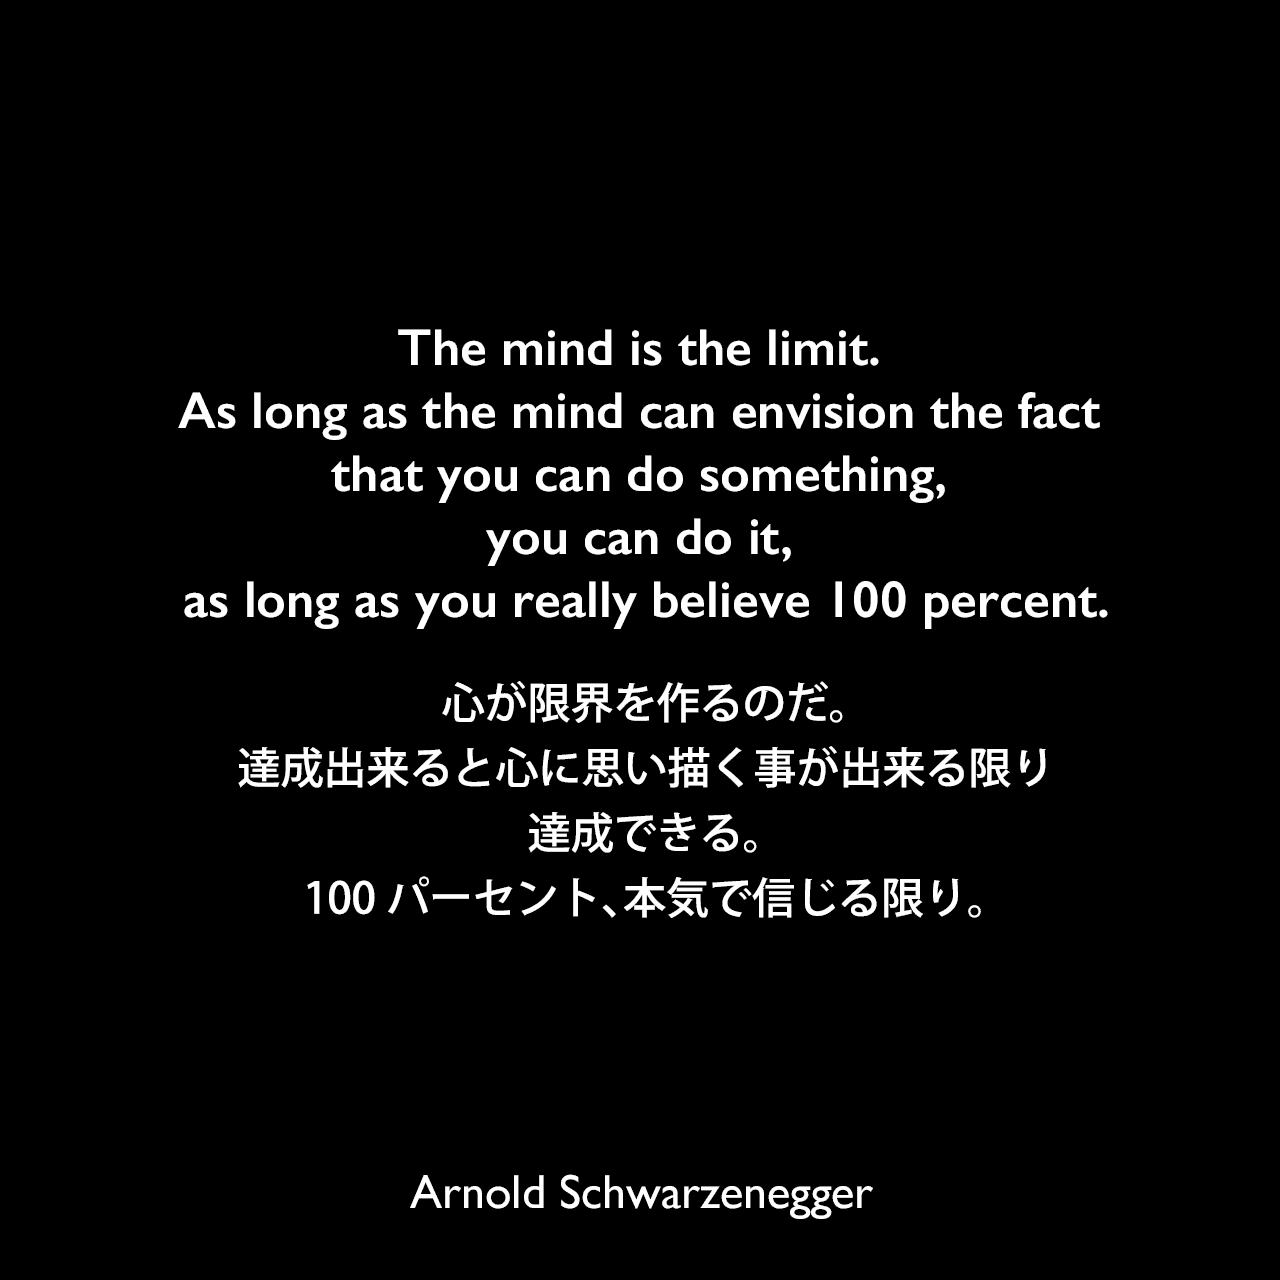 The mind is the limit. As long as the mind can envision the fact that you can do something, you can do it, as long as you really believe 100 percent.心が限界を作るのだ。達成出来ると心に思い描く事が出来る限り、達成できる。100パーセント、本気で信じる限り。Arnold Schwarzenegger